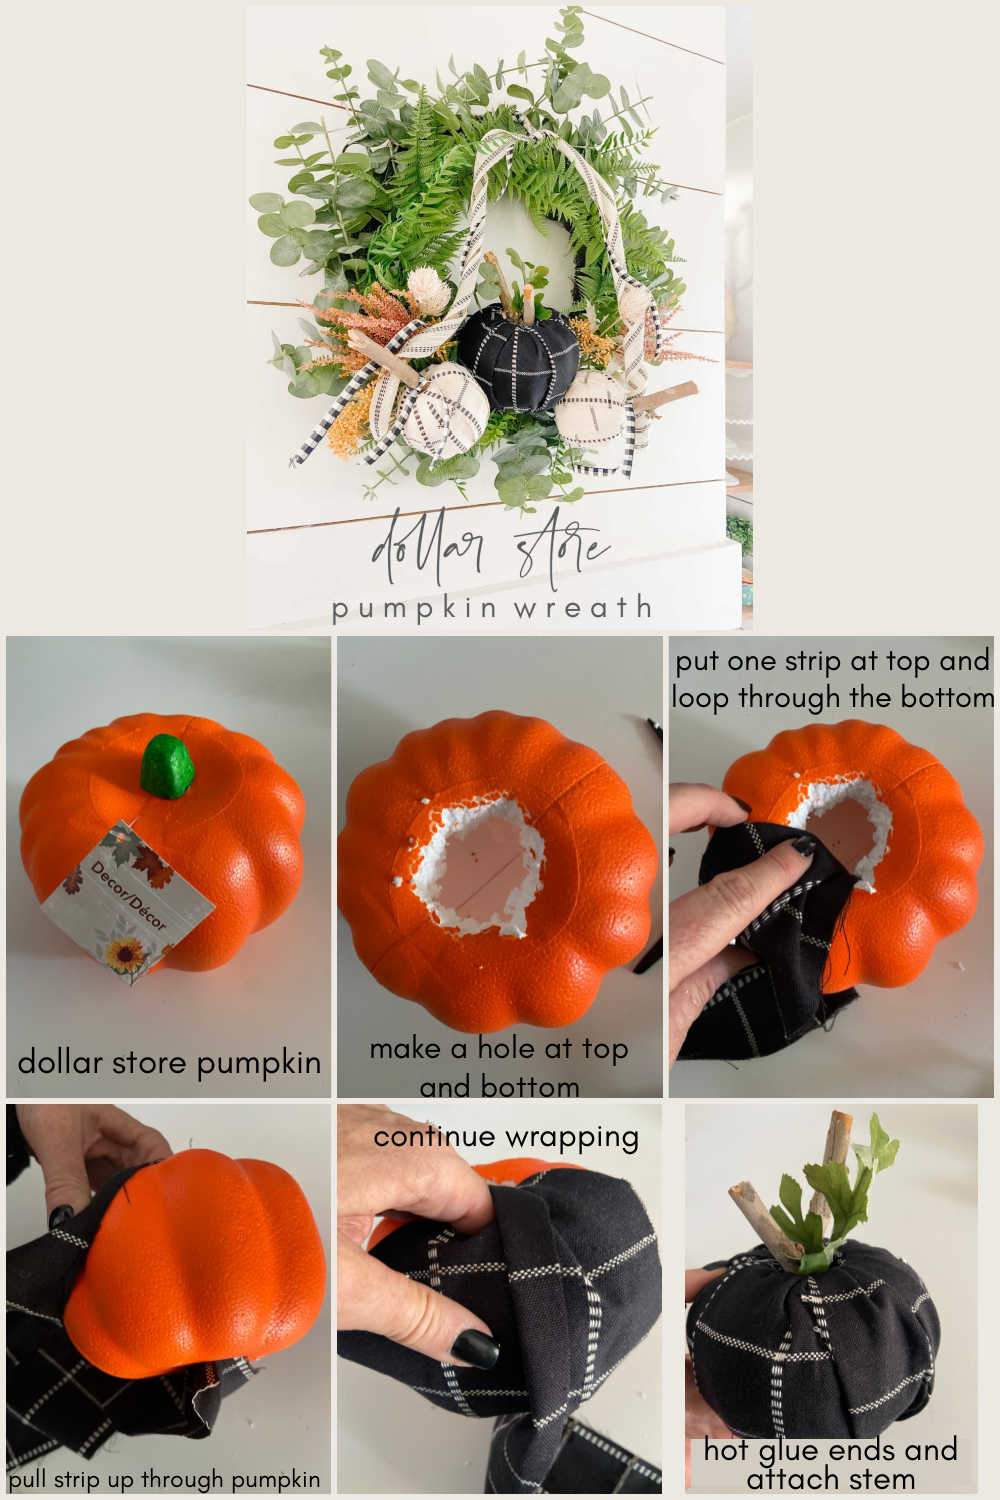 Dollar Store Pumpkin Fall Wreath. Turn $1 pumpkins into beautiful decor by covering them in fabric and adding them to a simple wreath! 